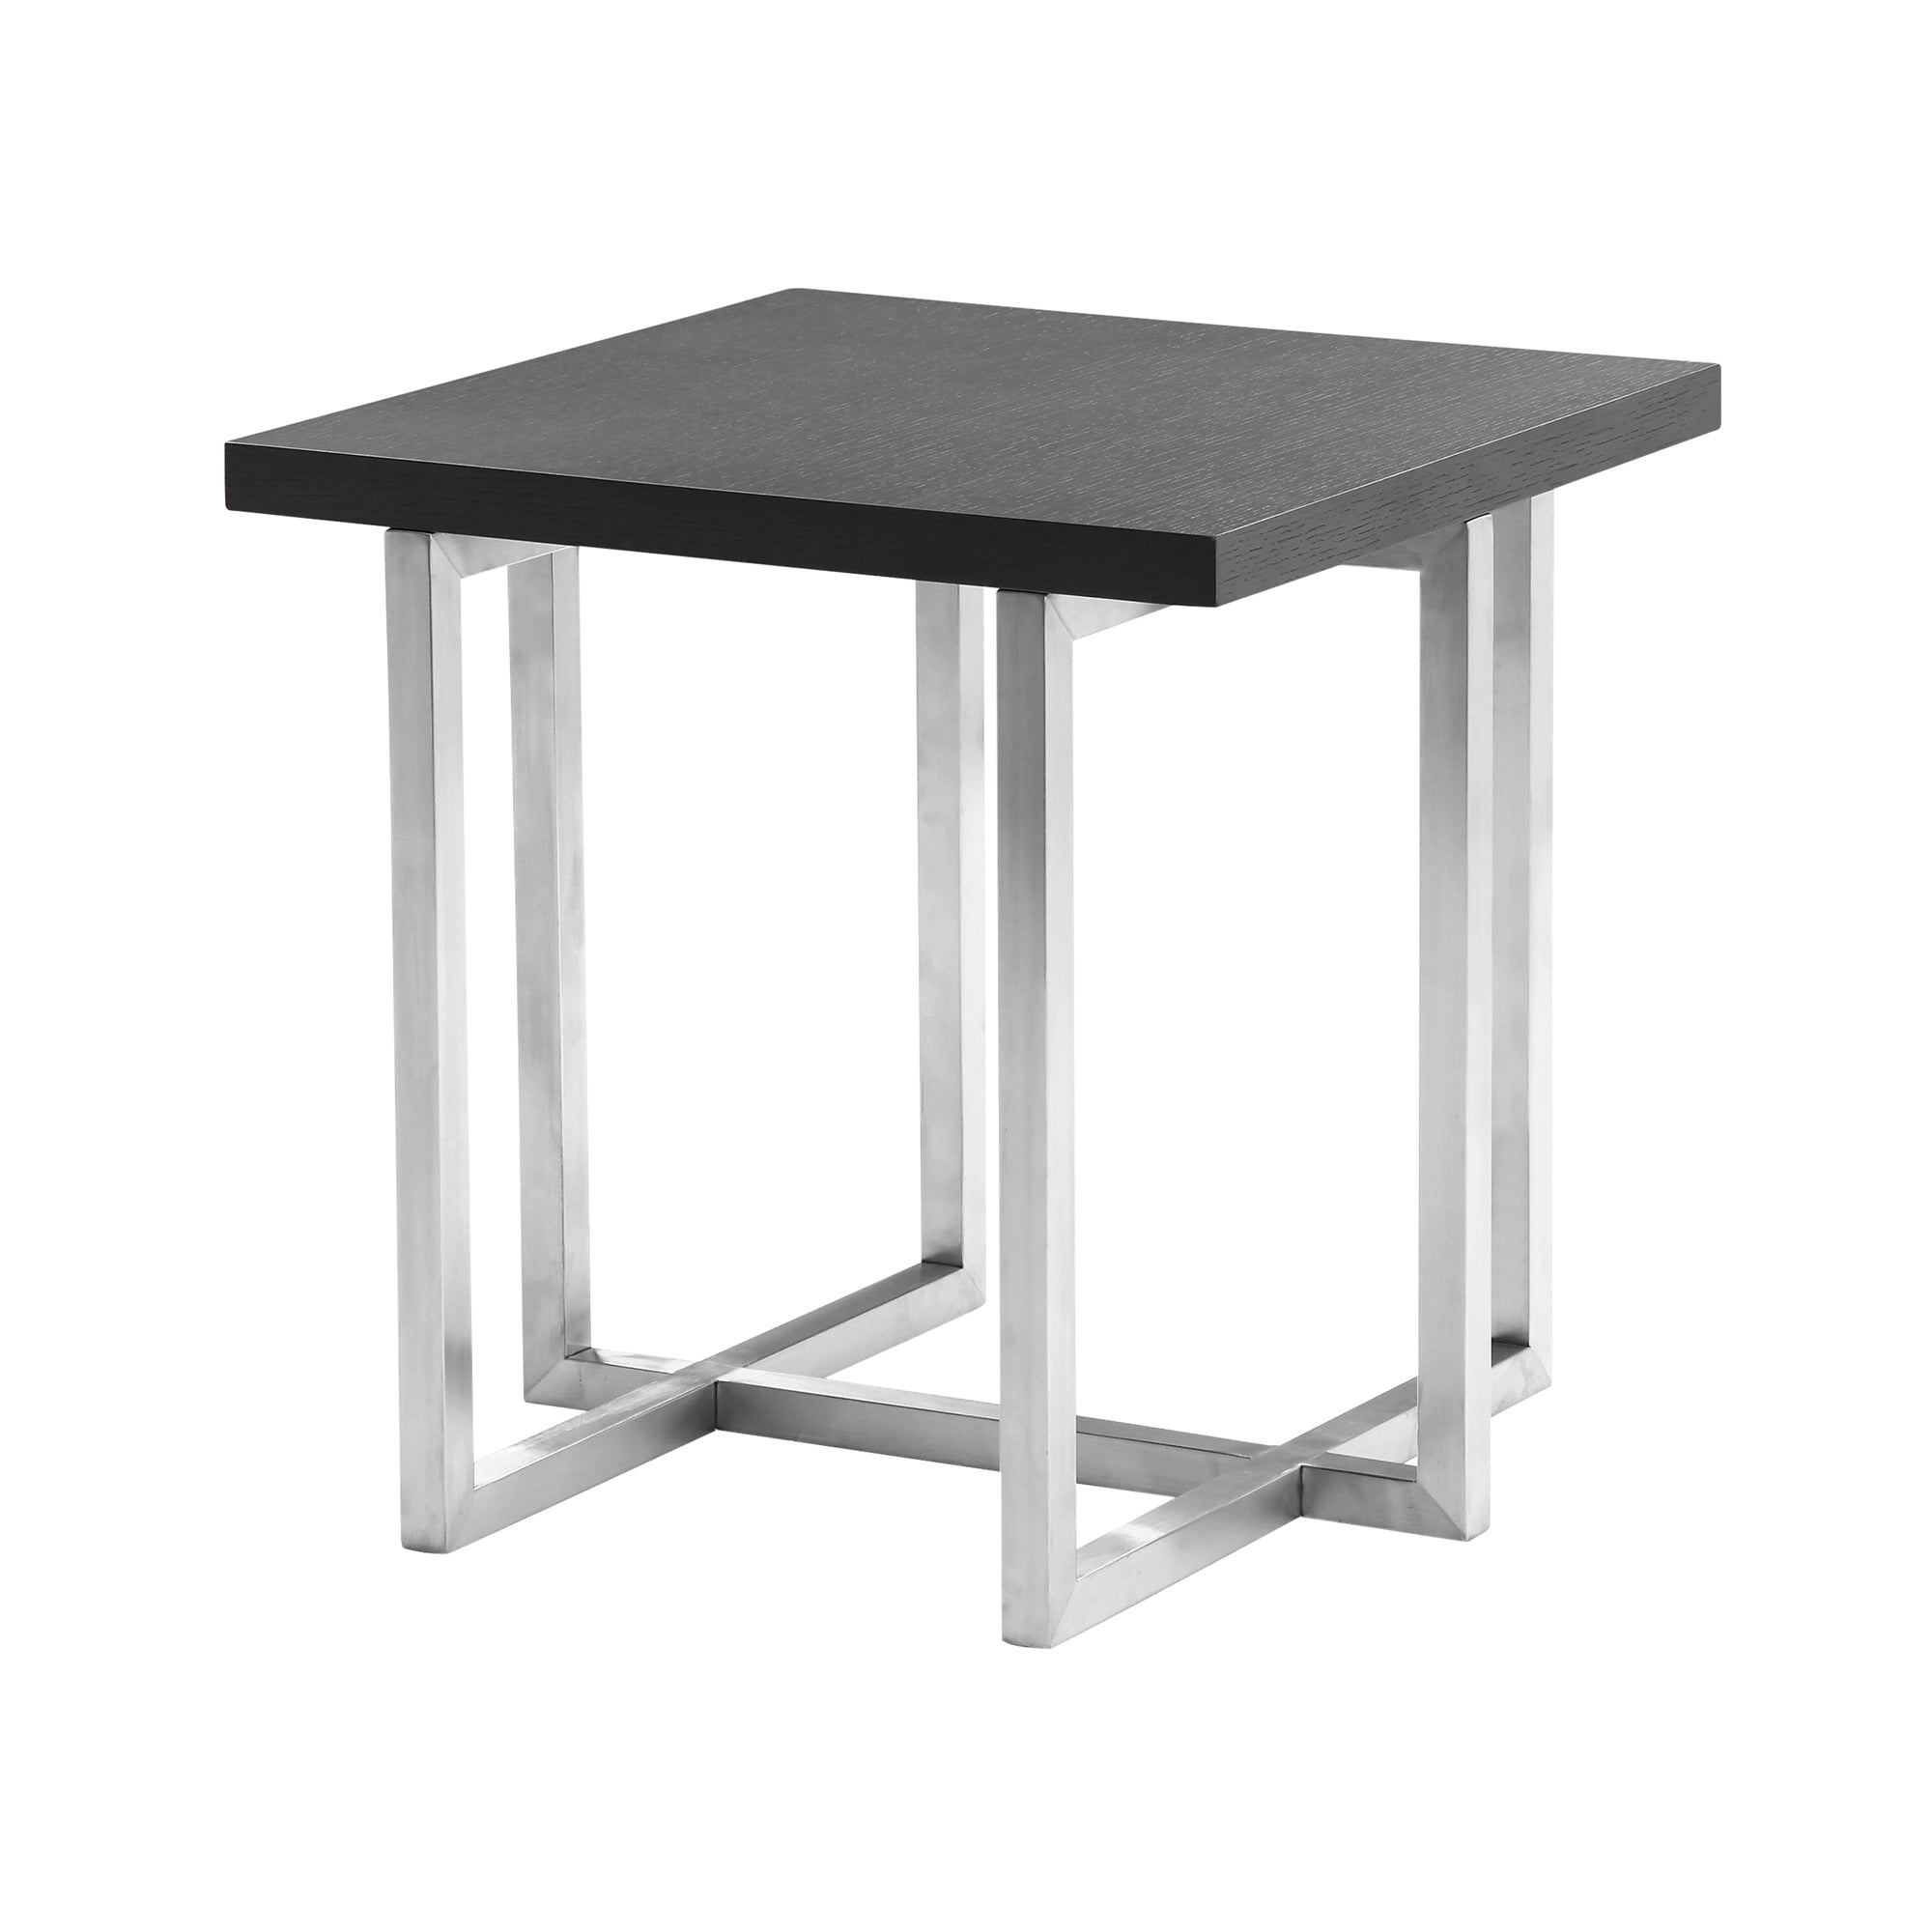 Armen Living Lctplagrbs Topaz Contemporary End Table In Brushed Stainless Steel Finish With Grey Veneer Wood Top